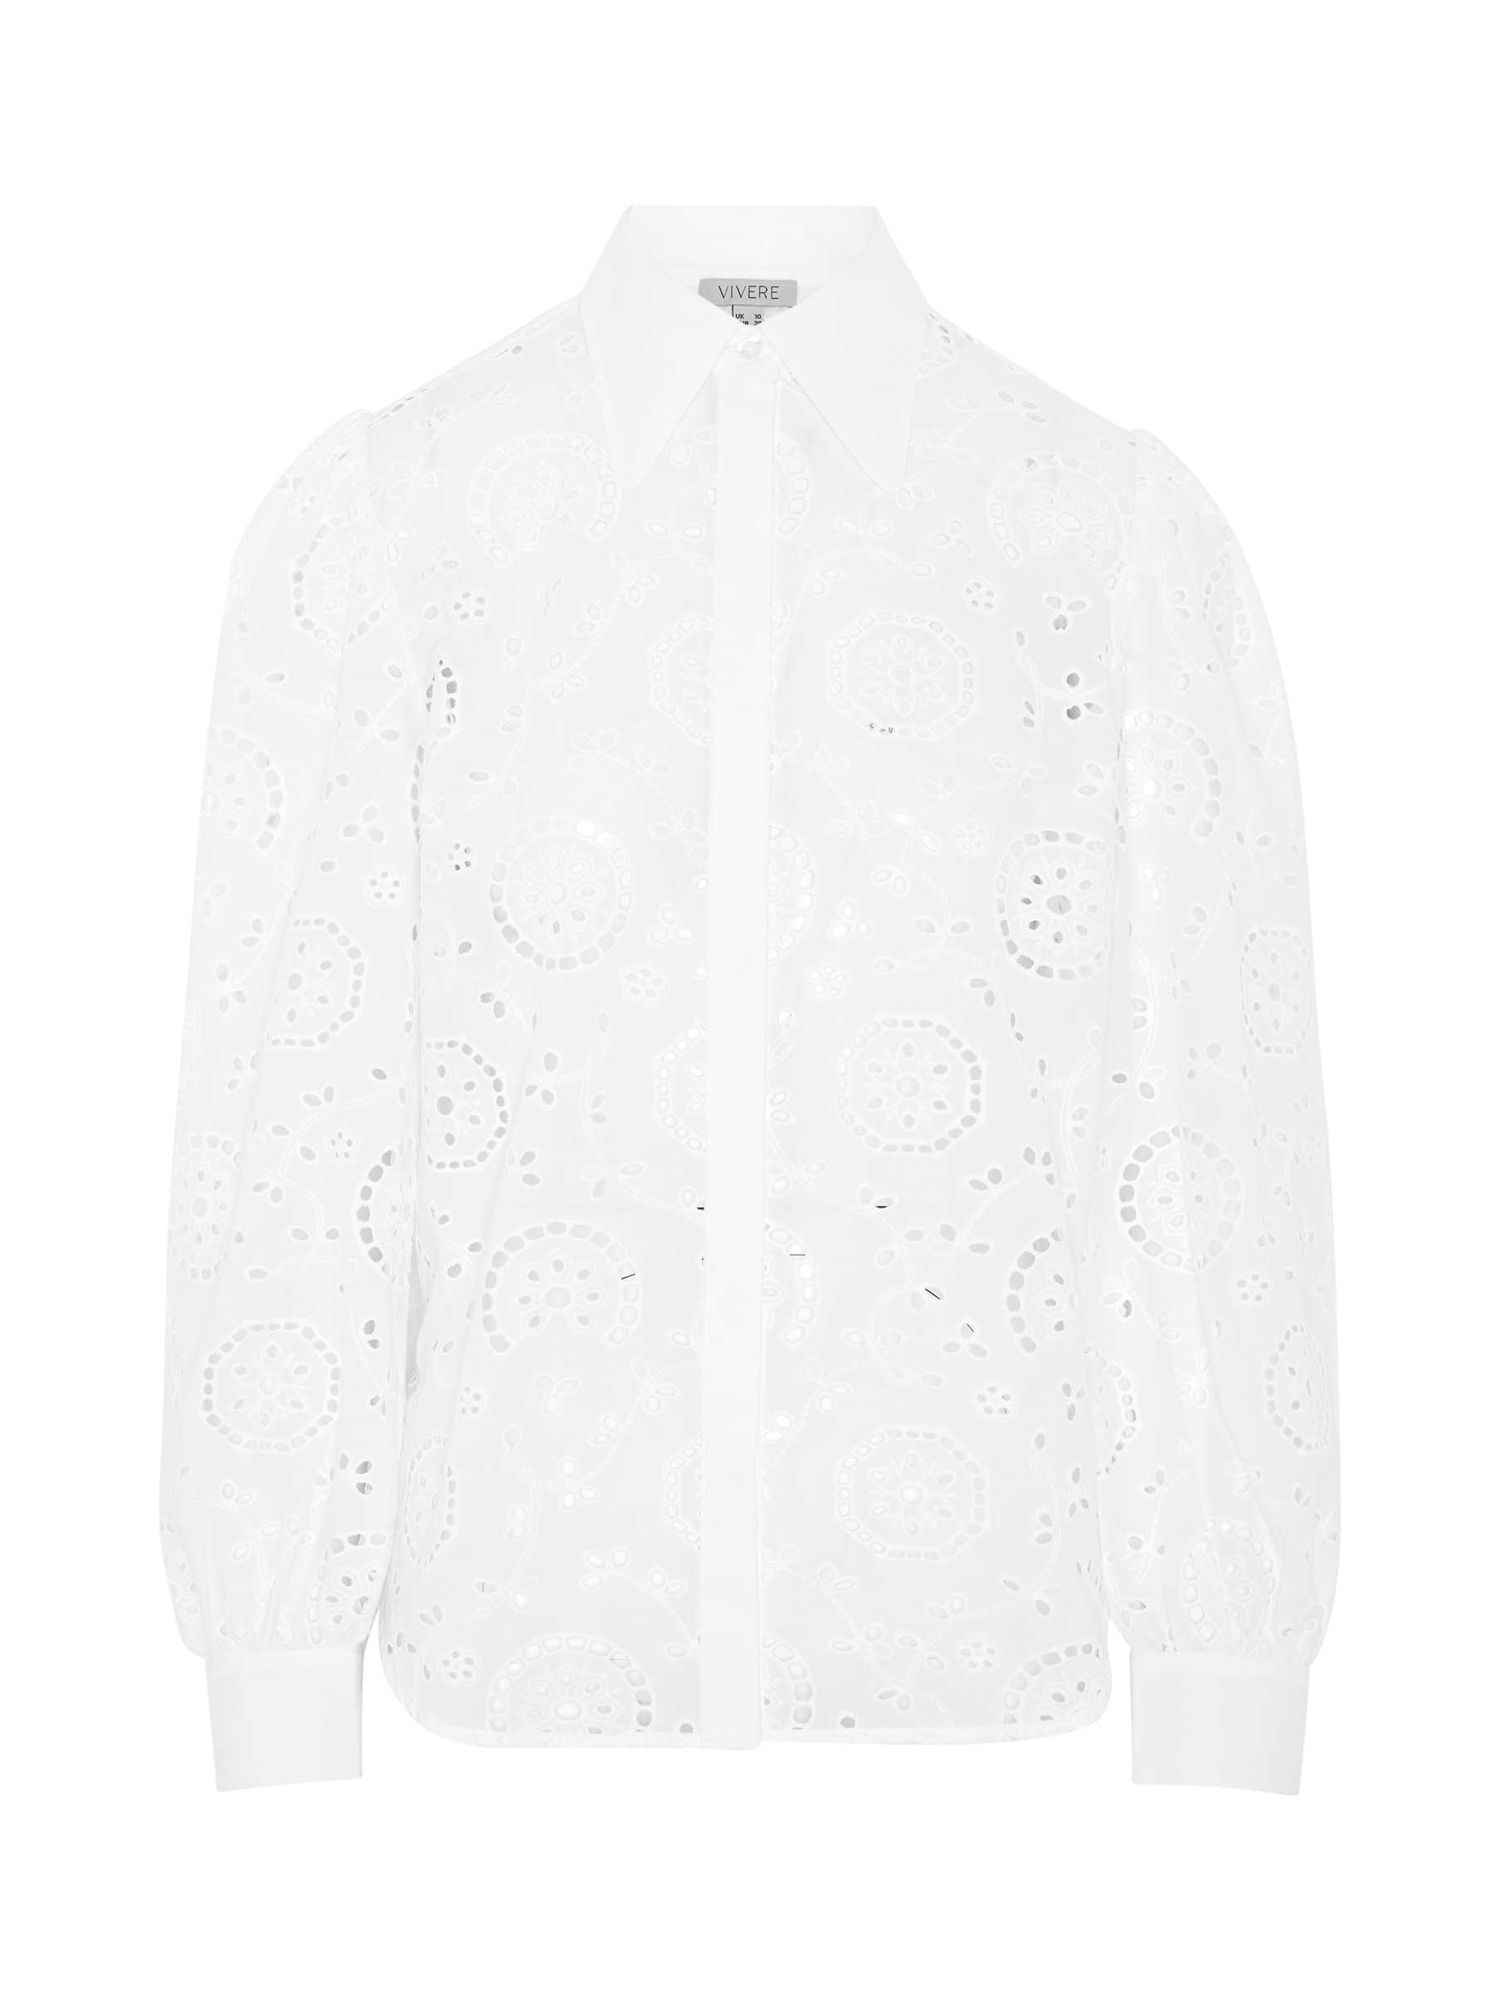 Buy Vivere By Savannah Miller Ava Broderie Anglaise Puff Sleeve Blouse, White Online at johnlewis.com